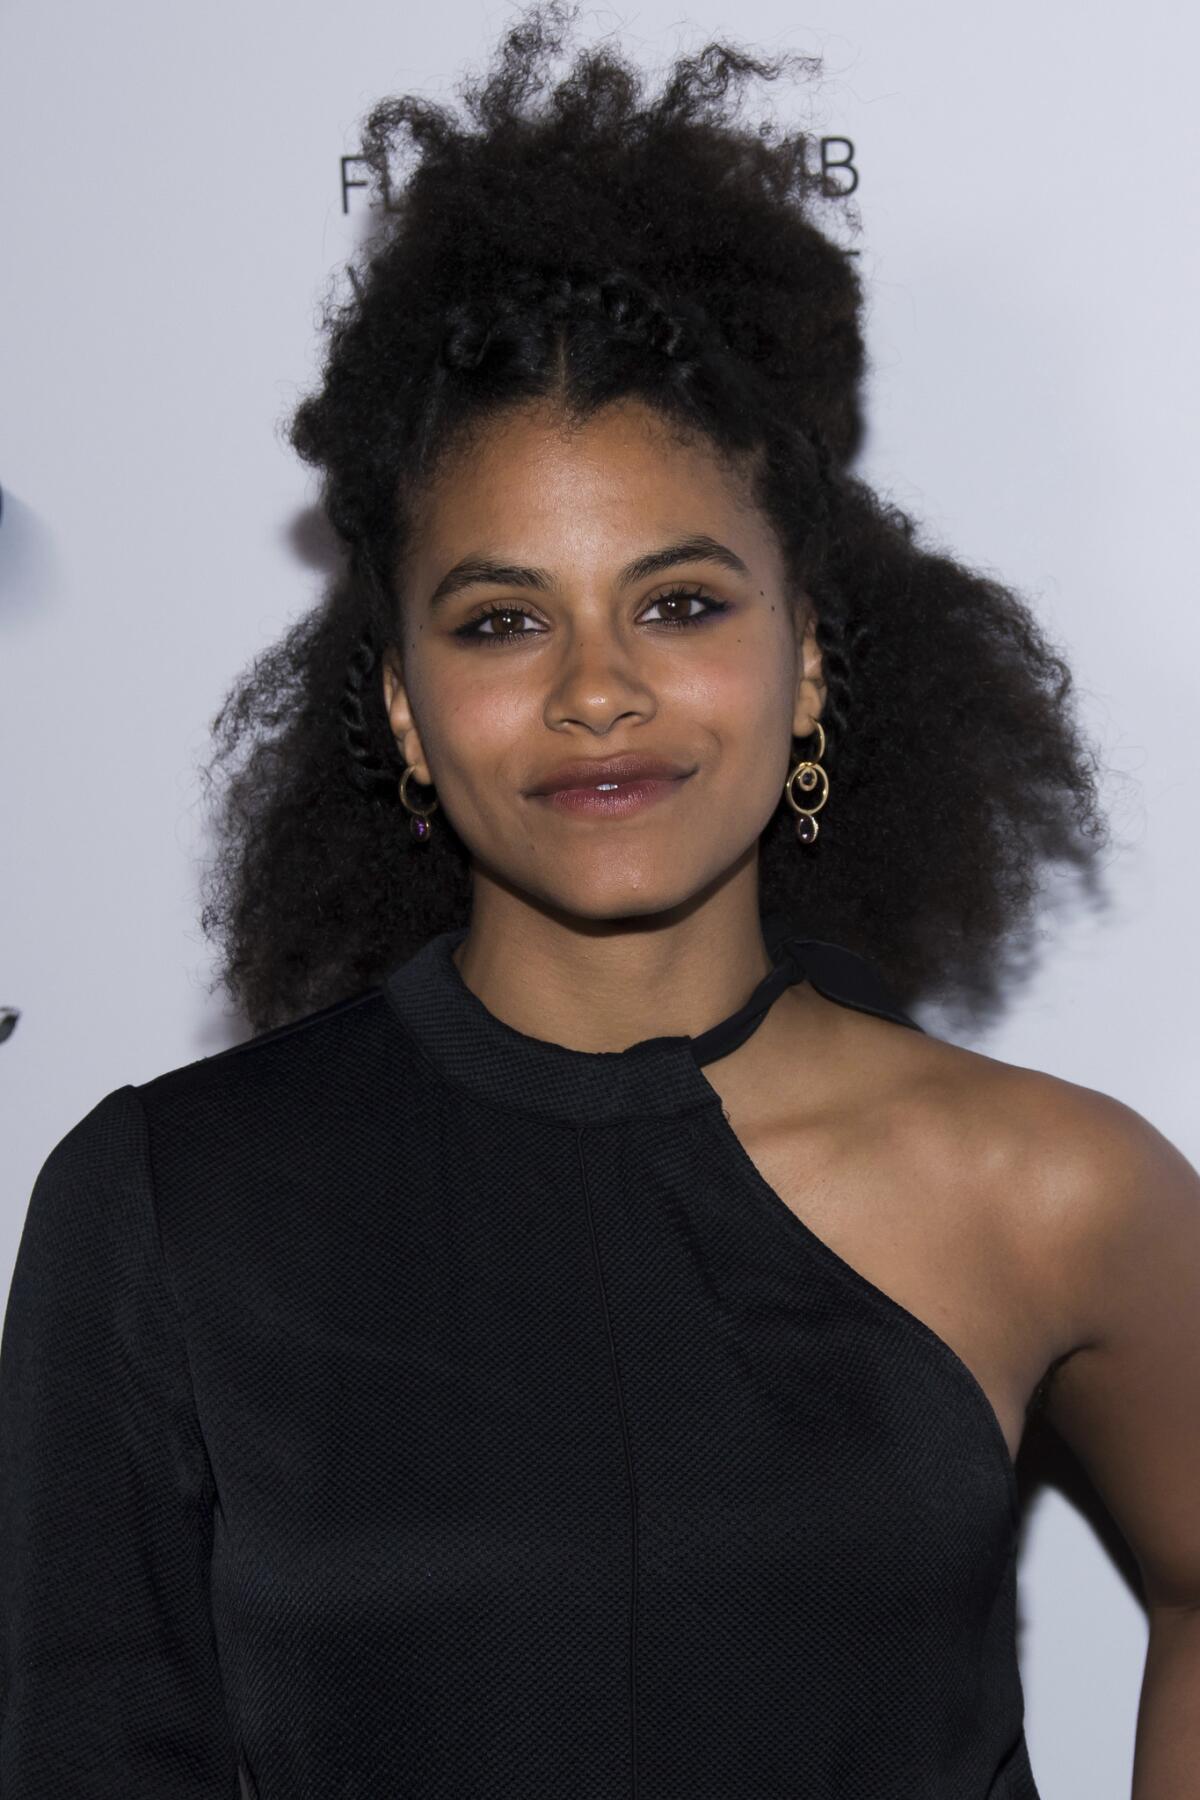 Emmy nominee Zazie Beetz at the FX Networks and Vanity Fair pre-Emmy party at Craft in Los Angeles on Sept. 16, 2017.